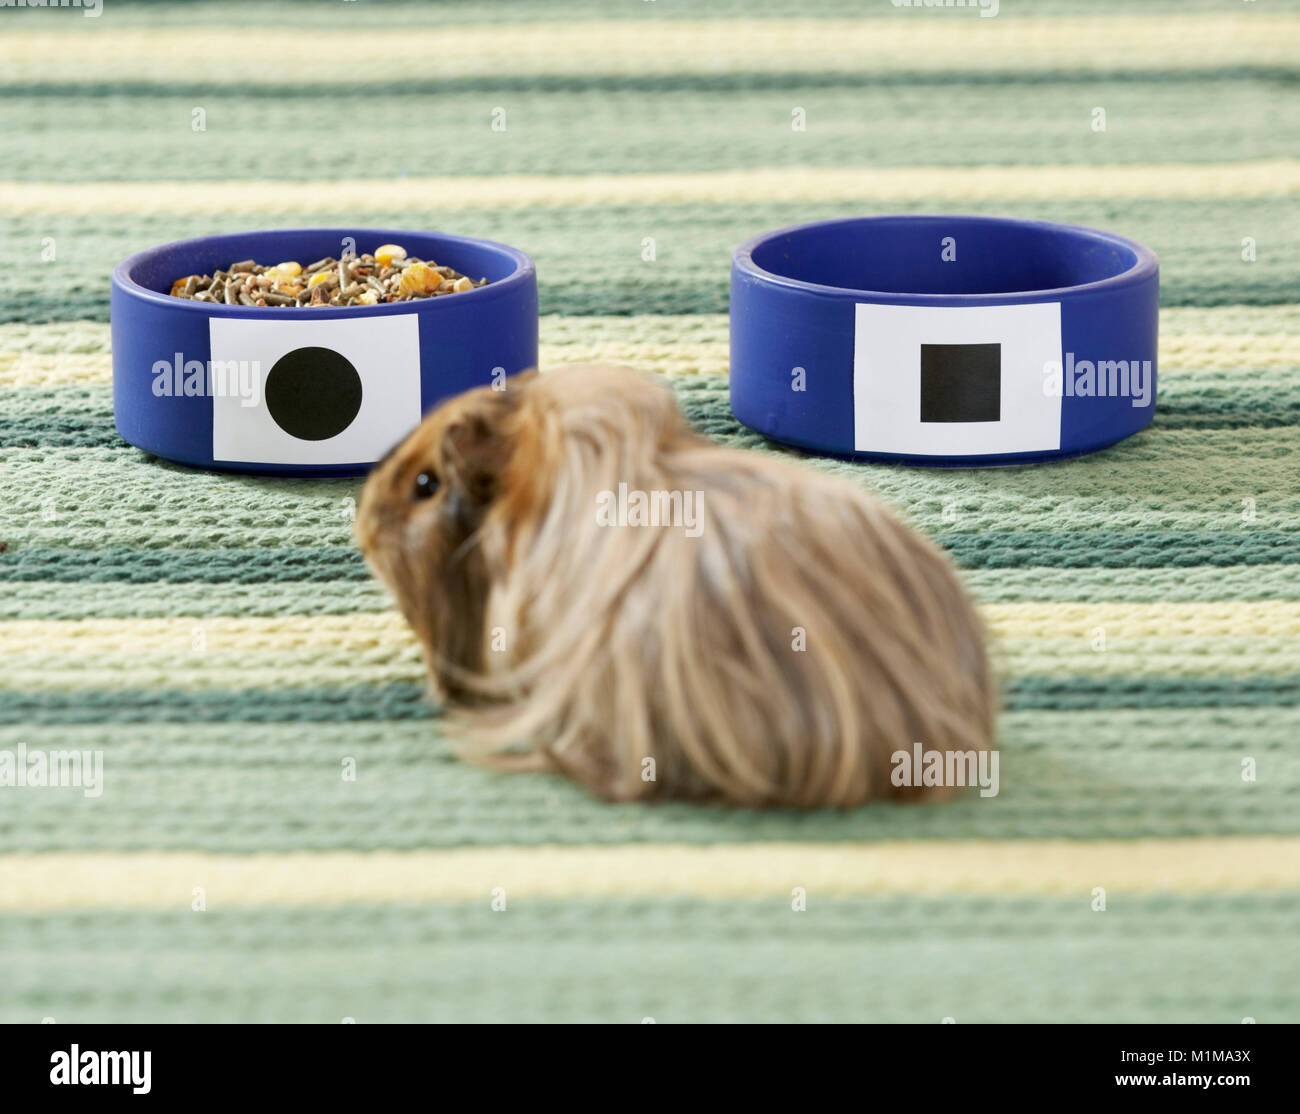 Domestic Guinea Pig, Cavie. Long-haired Guinea Pig having the choice between two food bowl, one of them empty, intelligence, learning. Germany Stock Photo